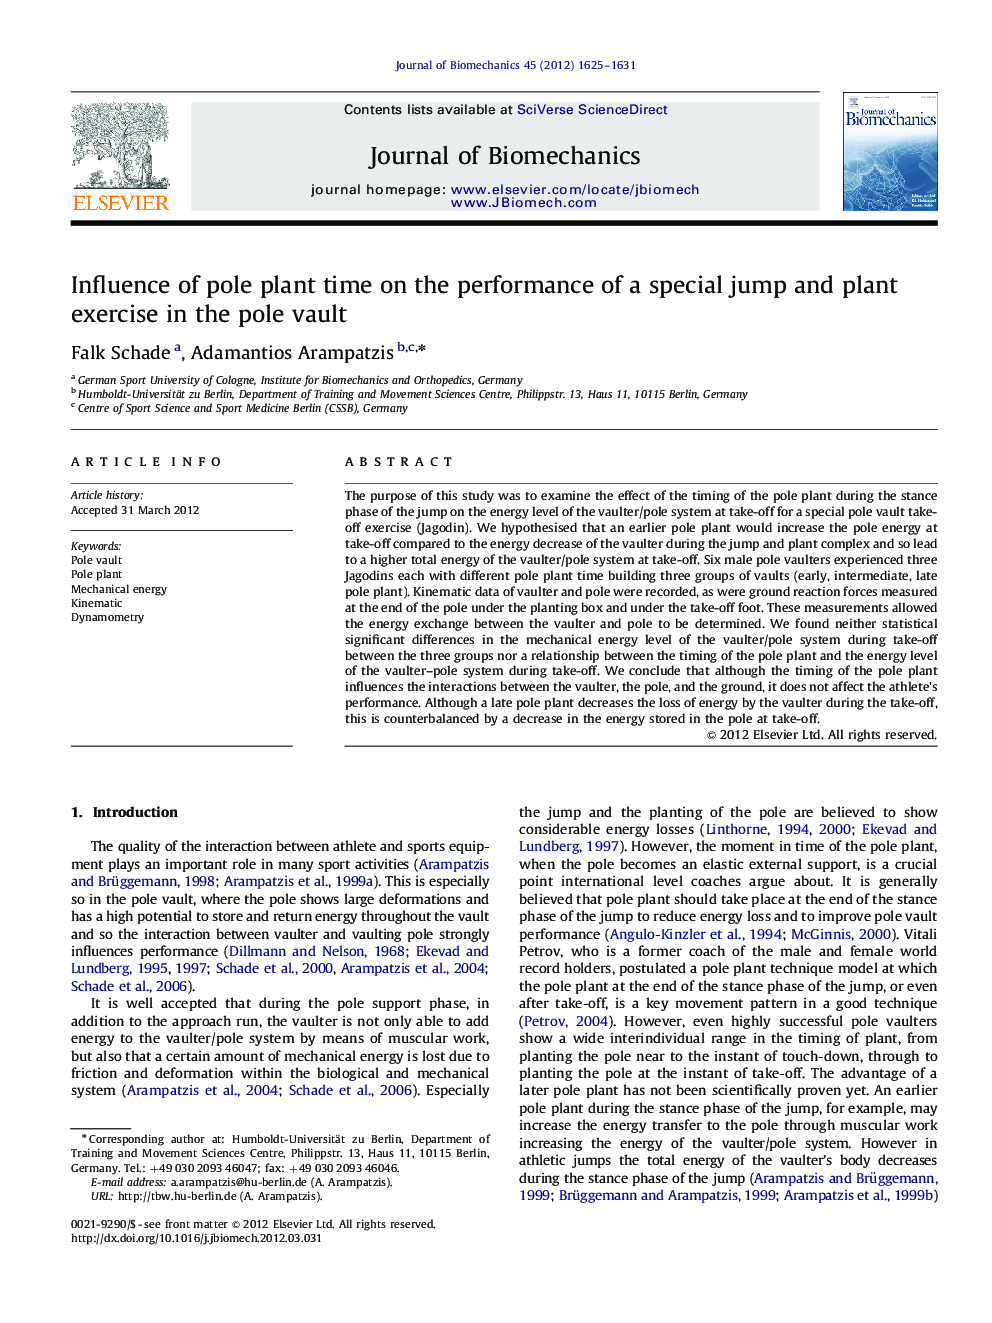 Influence of pole plant time on the performance of a special jump and plant exercise in the pole vault